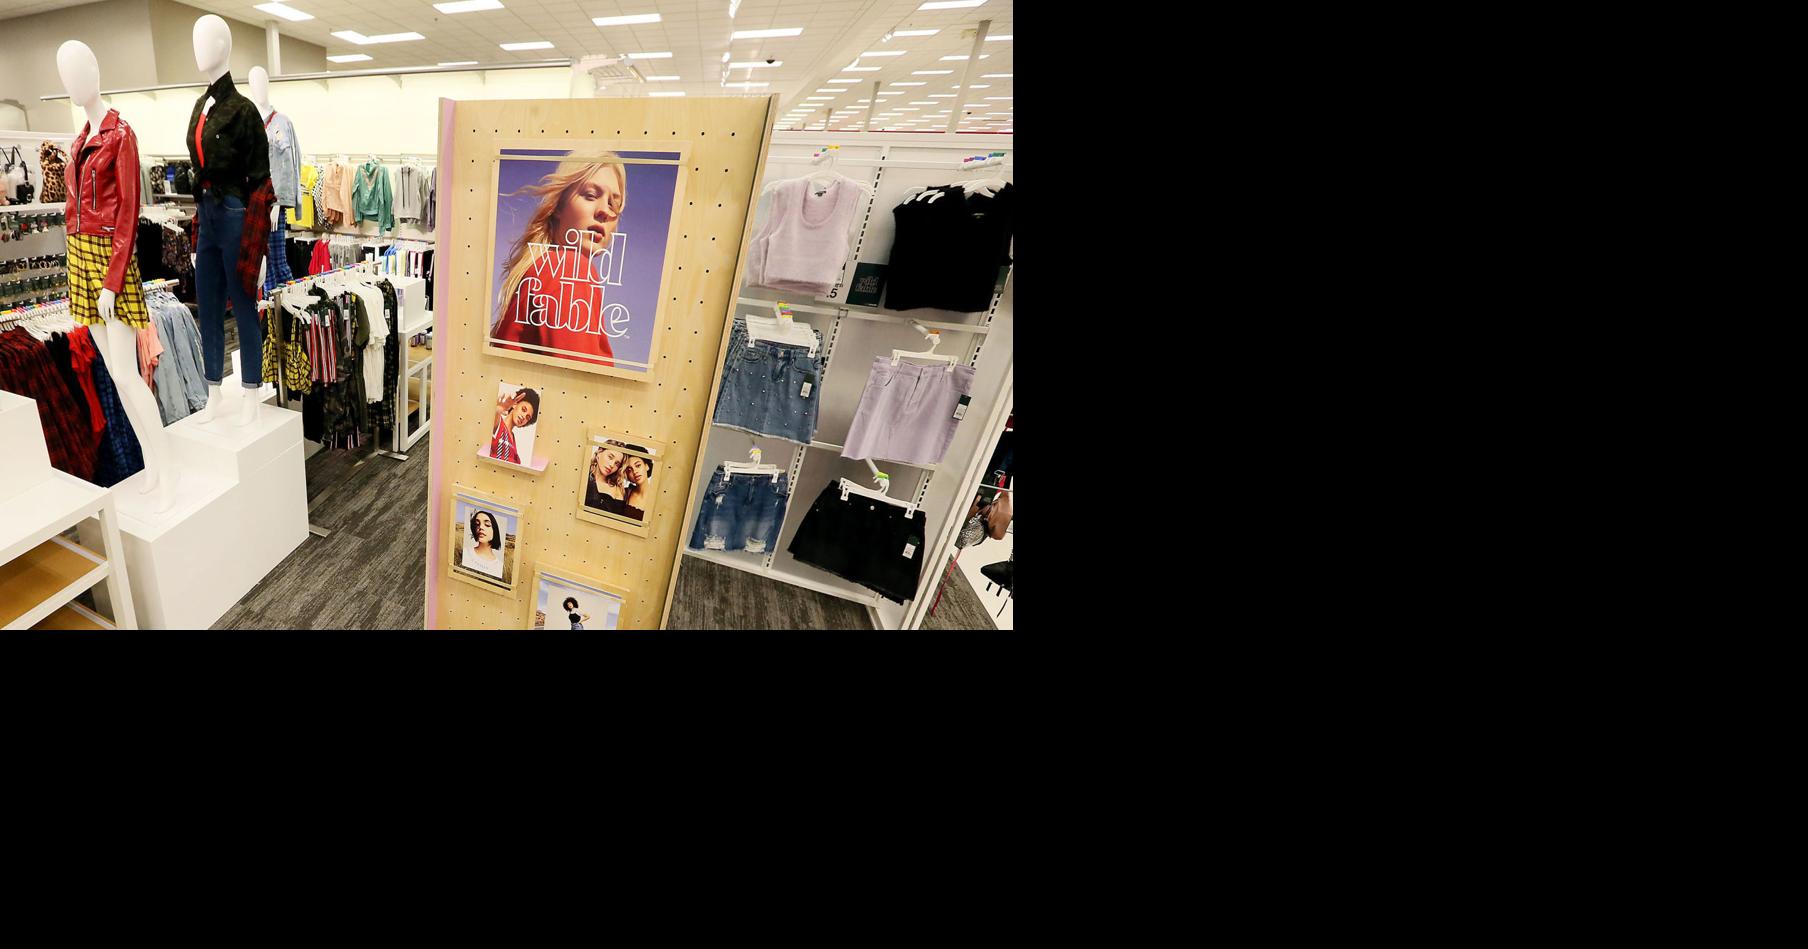 Meet the 23-year-old Bettendorf-born designer behind Target's new